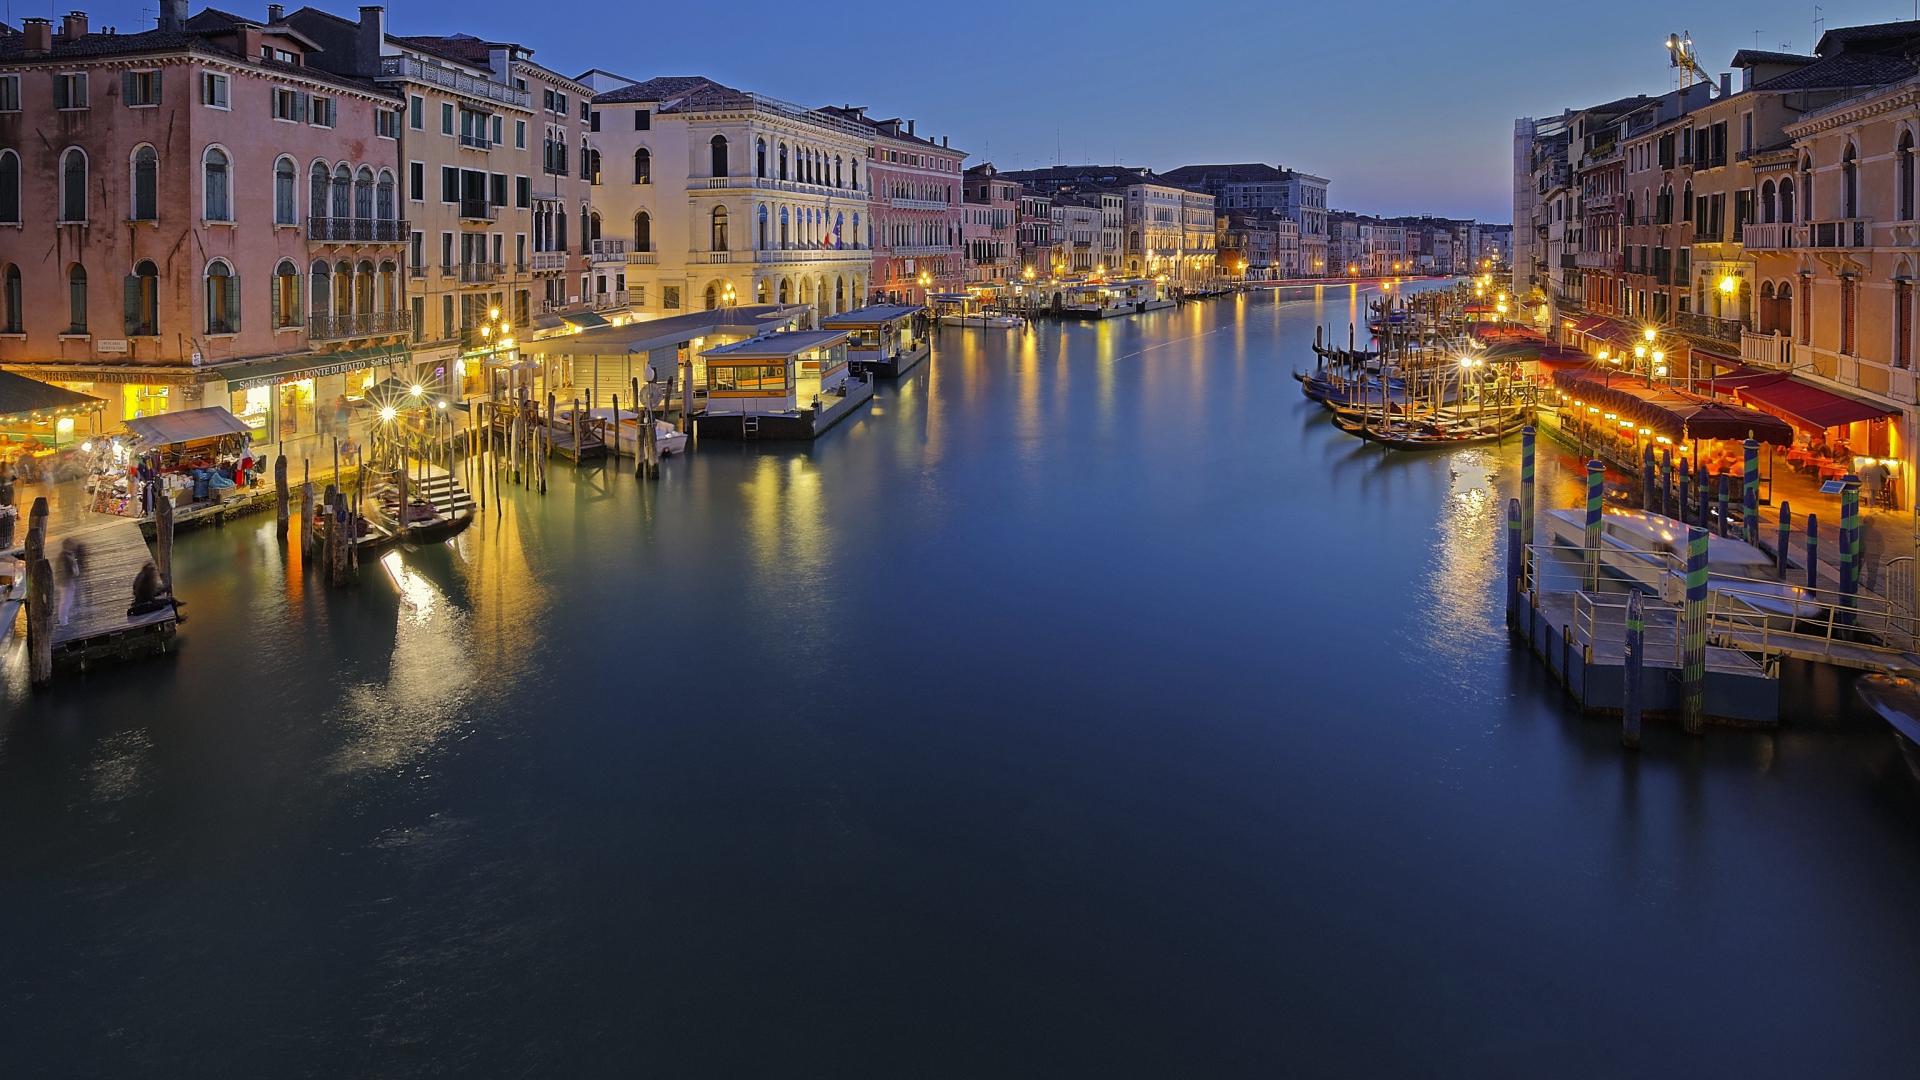 Houses on the bank of the canal in the evening, Venice, Italy